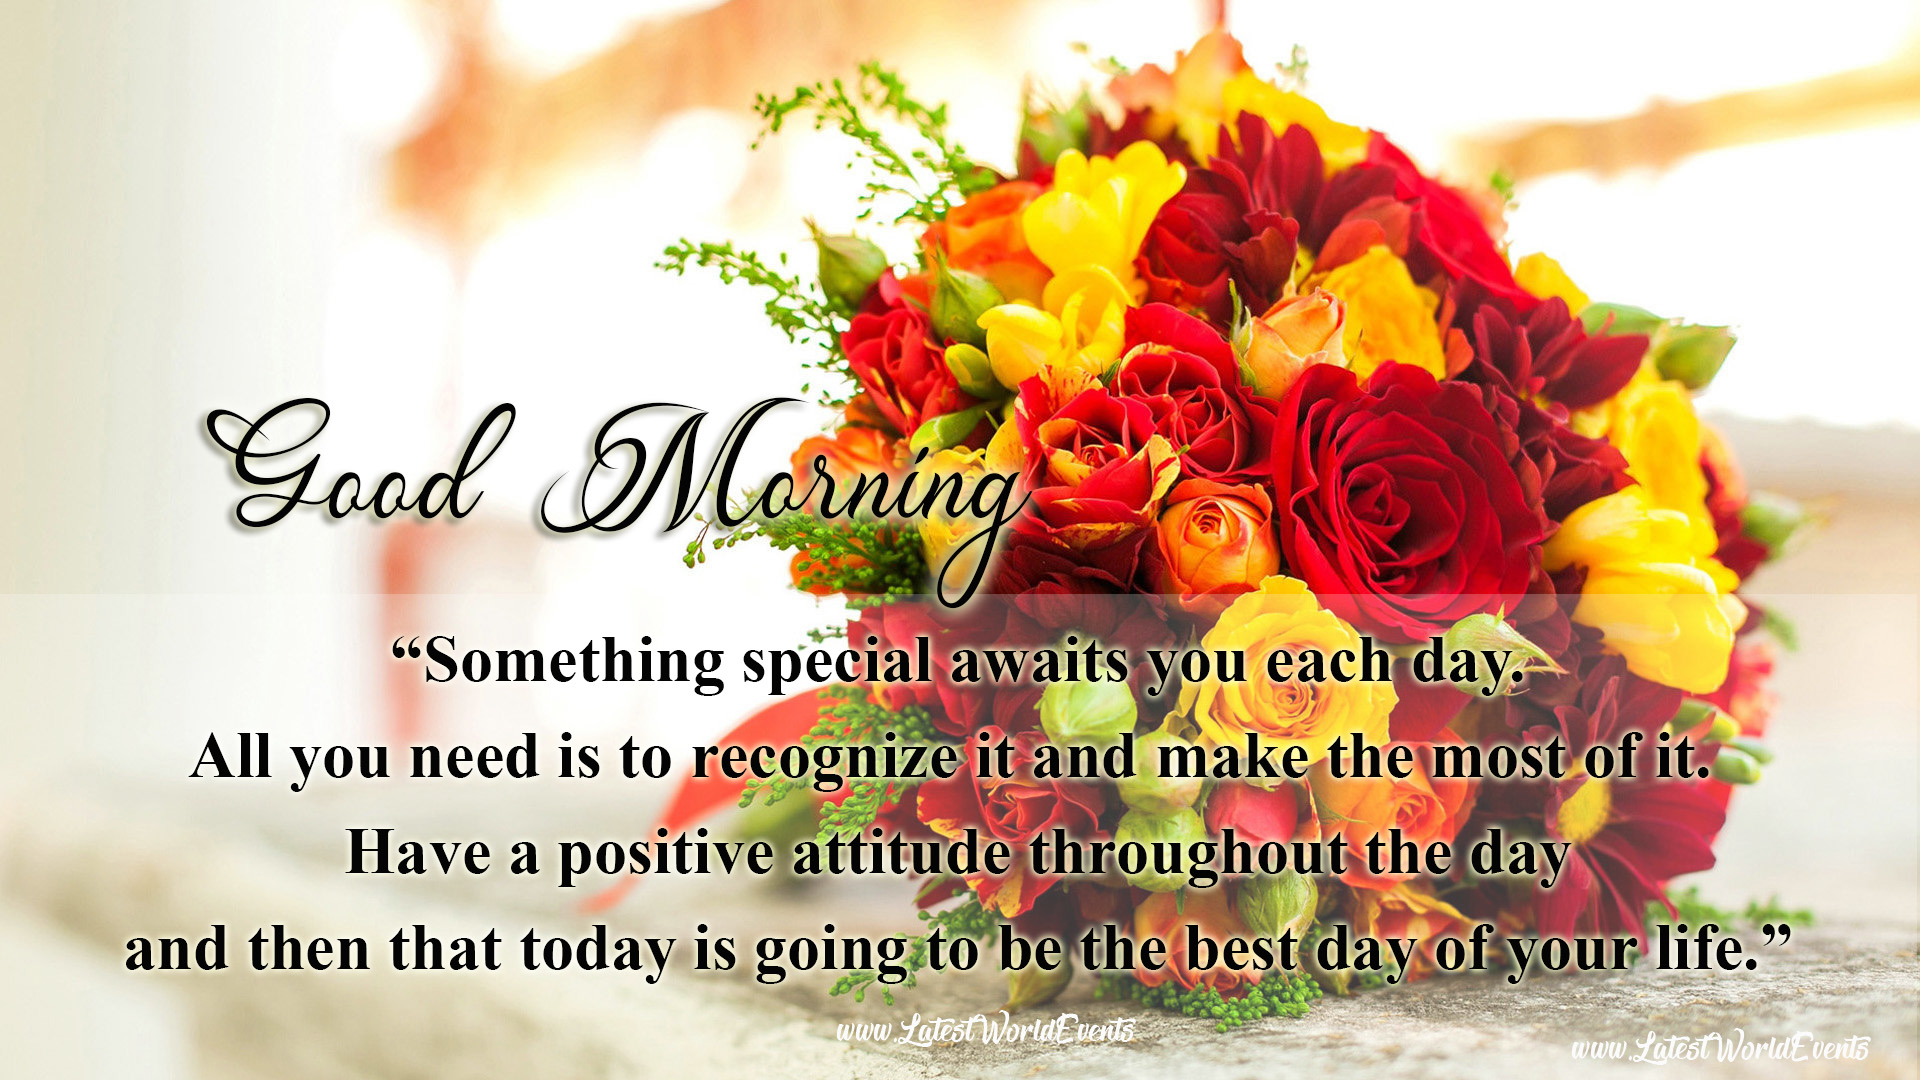 Download-good-morning-wishes